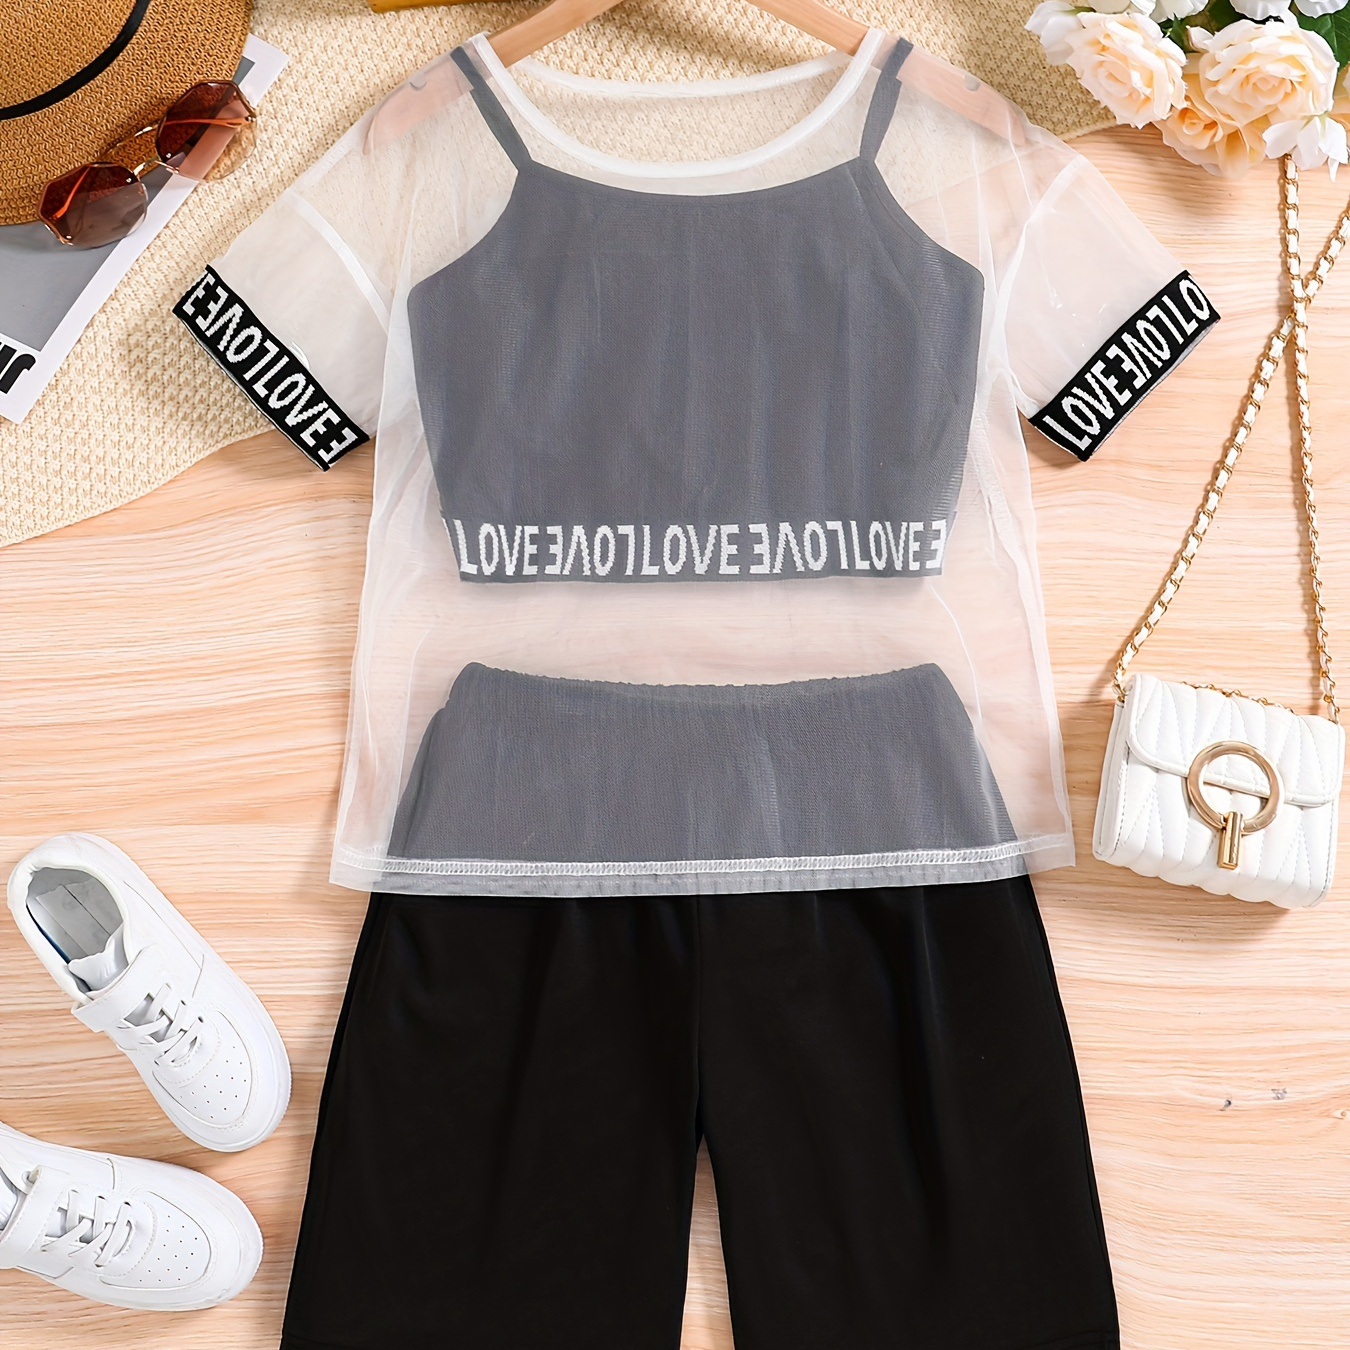 

Trendy Outfits Girl's Mesh Cover-up Top + Letter Tape Camisole + Shorts Set Street Casual Going Out Summer Clothes